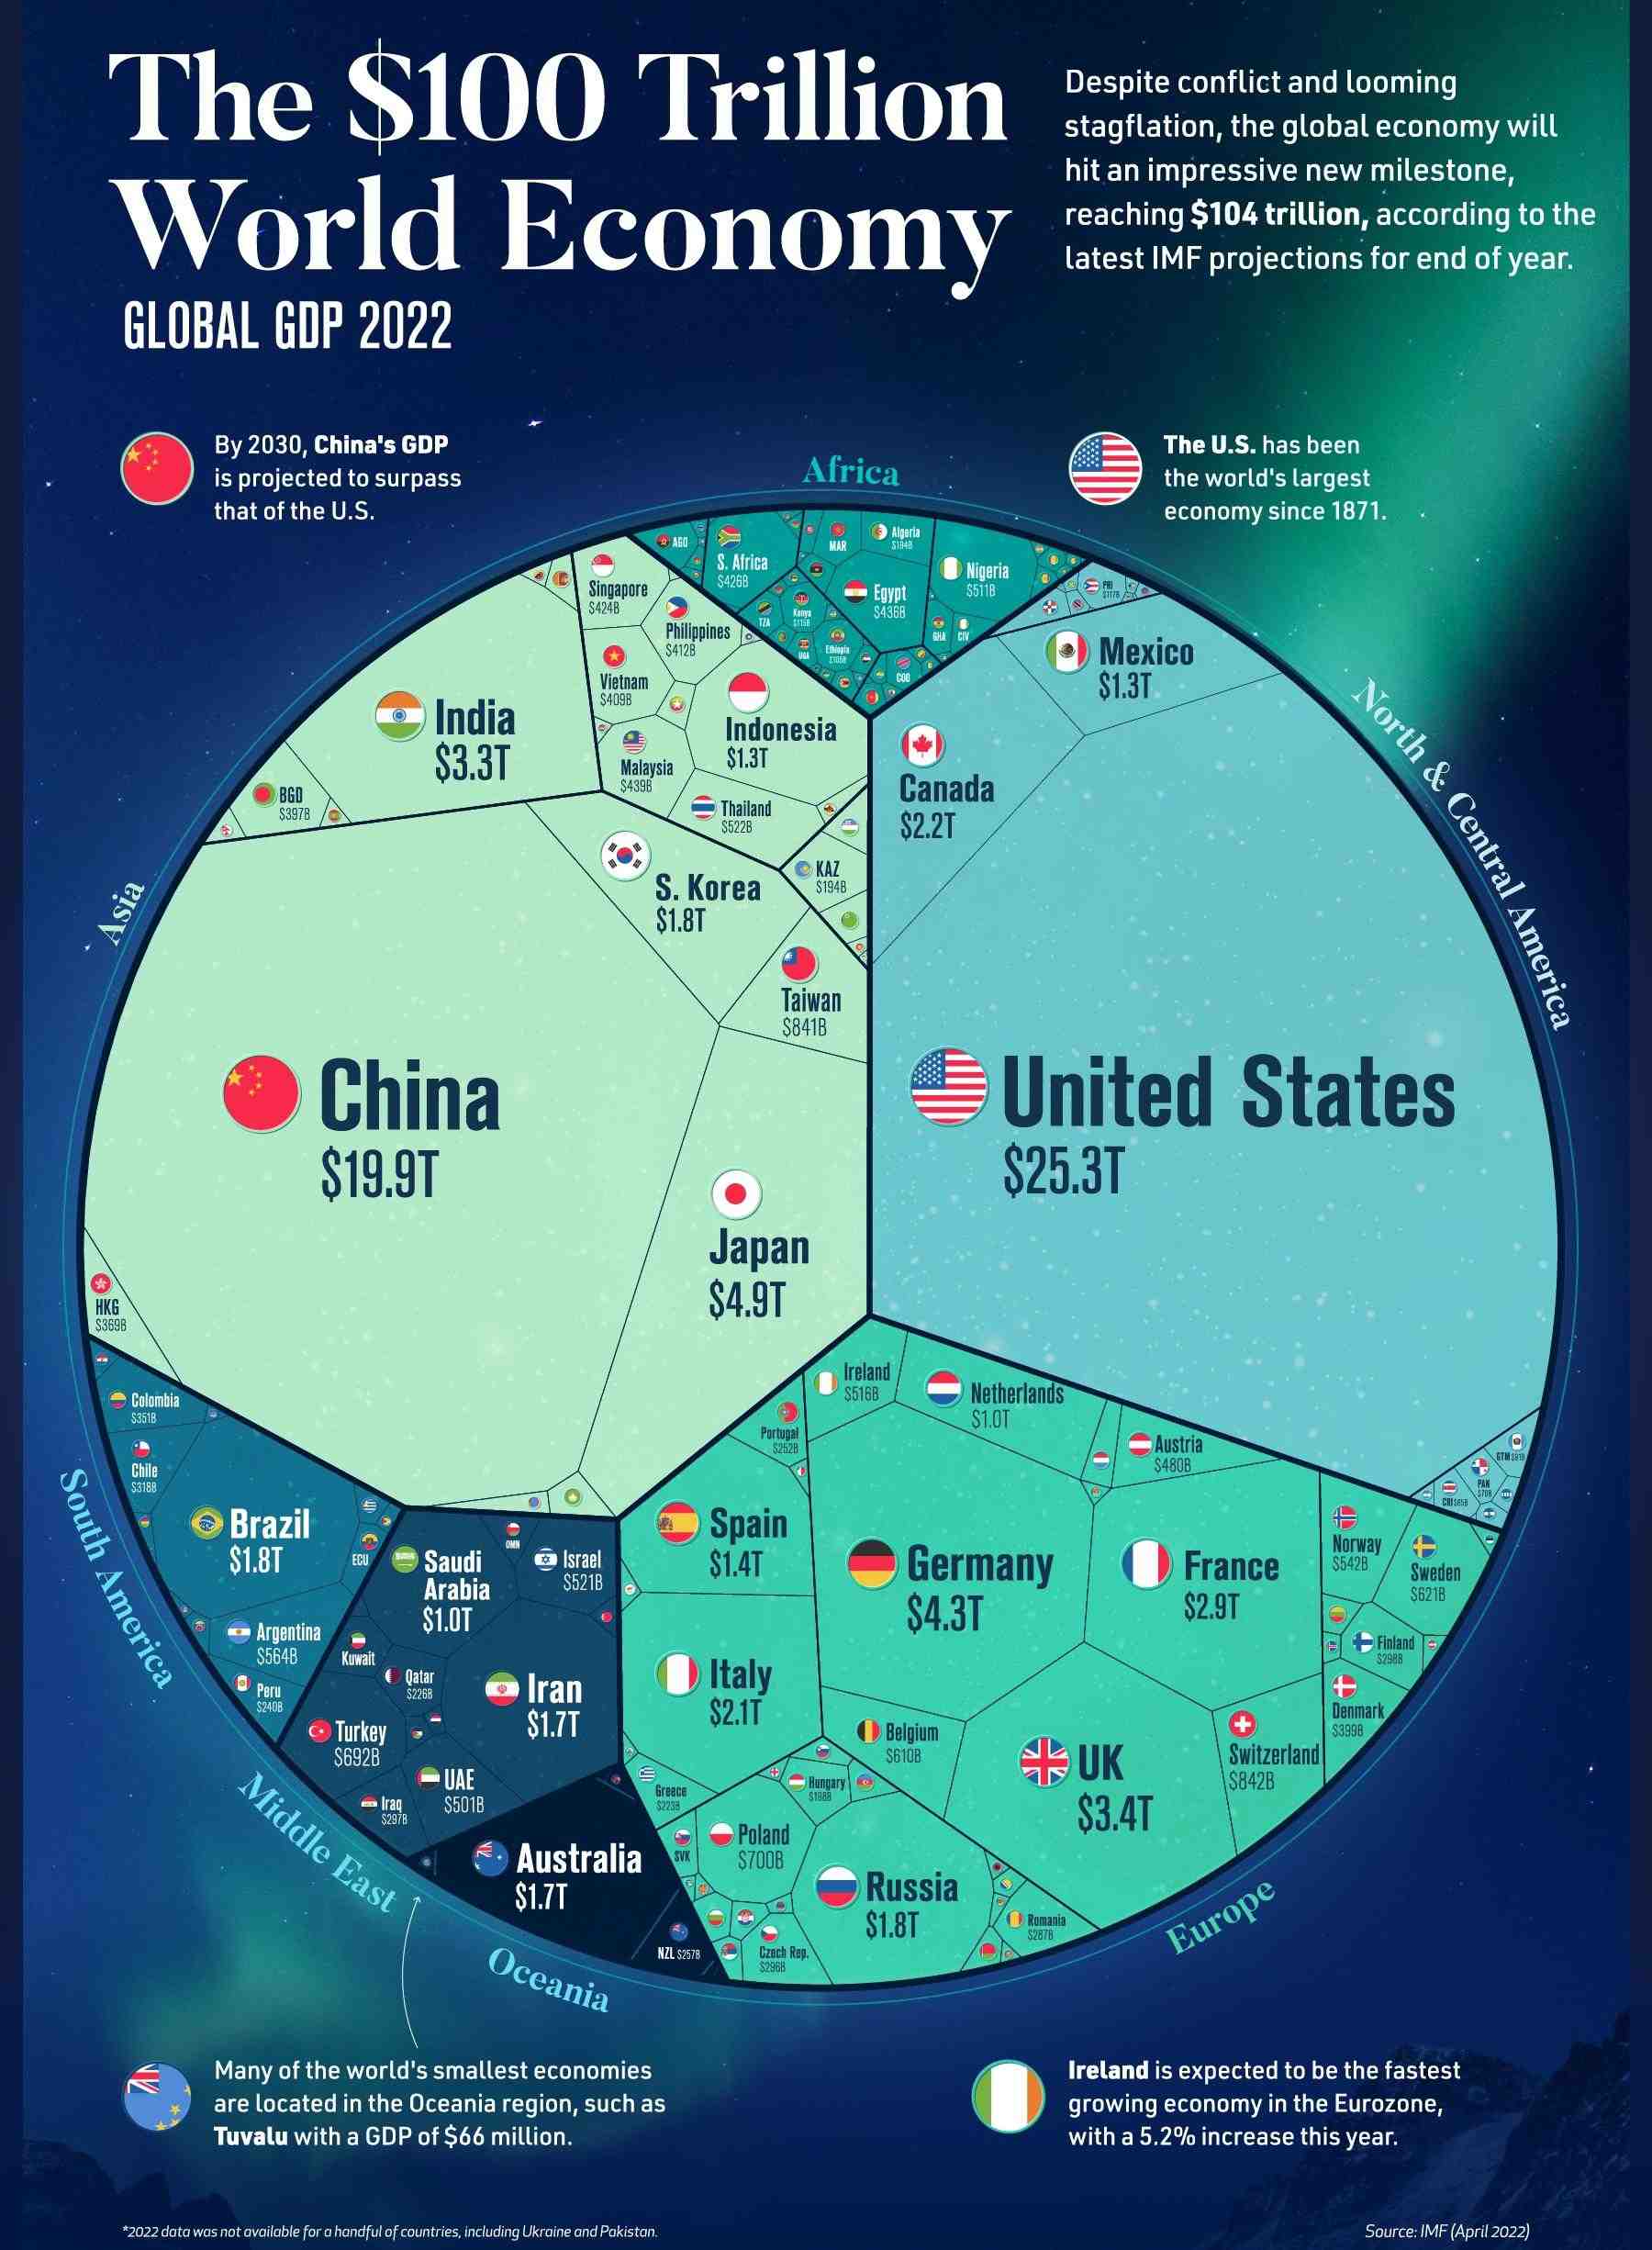 100 trillion world economy - The $100 Trillion World Economy Global Gdp 2022 Asia Hkg $3698 America Colombia $3518 B Chile $3188 By 2030, China's Gdp is projected to surpass that of the U.S. Bgd $3978 Brazil $1.8T Argentina $5648 O Peru $240B China $19.9T